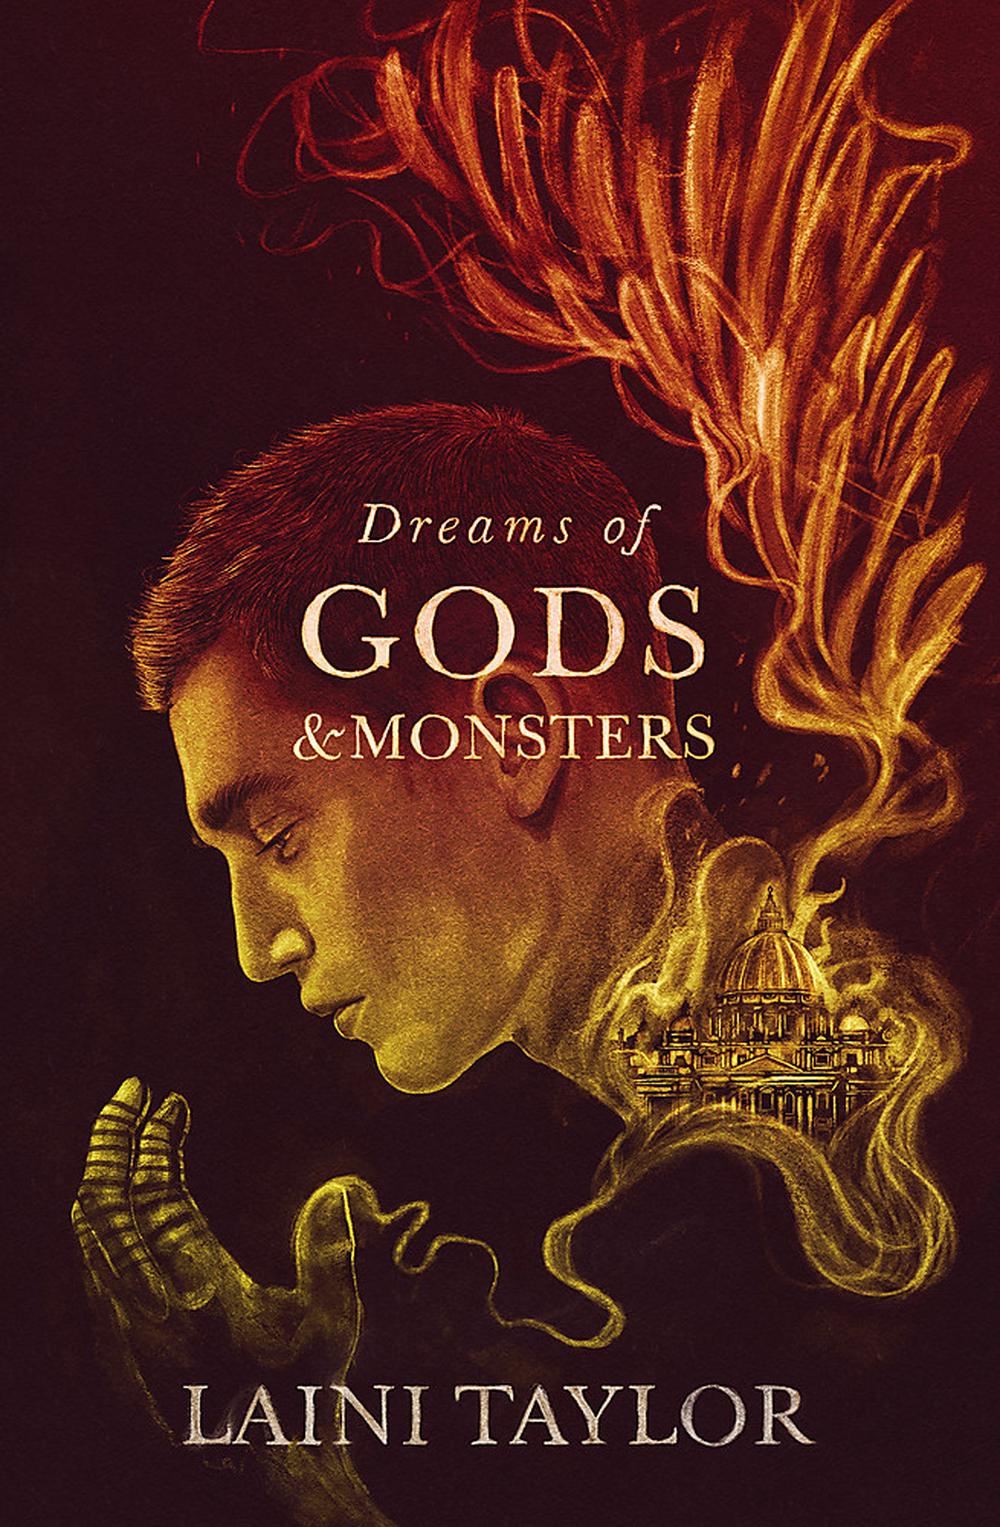 lifestyles of gods and monsters by emily roberson